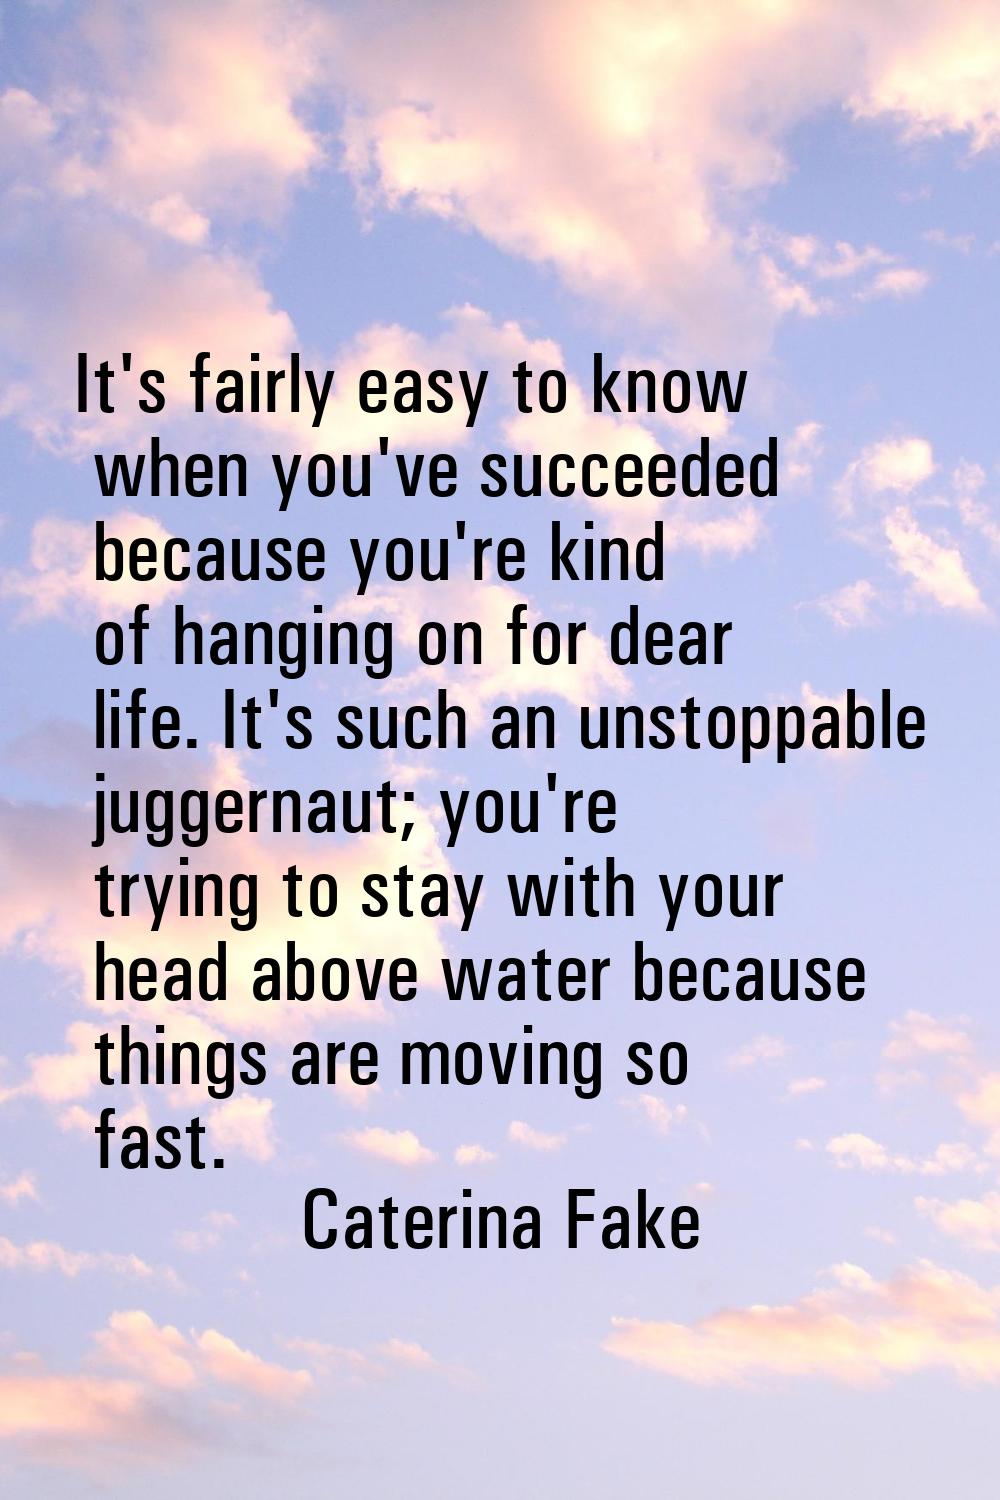 It's fairly easy to know when you've succeeded because you're kind of hanging on for dear life. It'